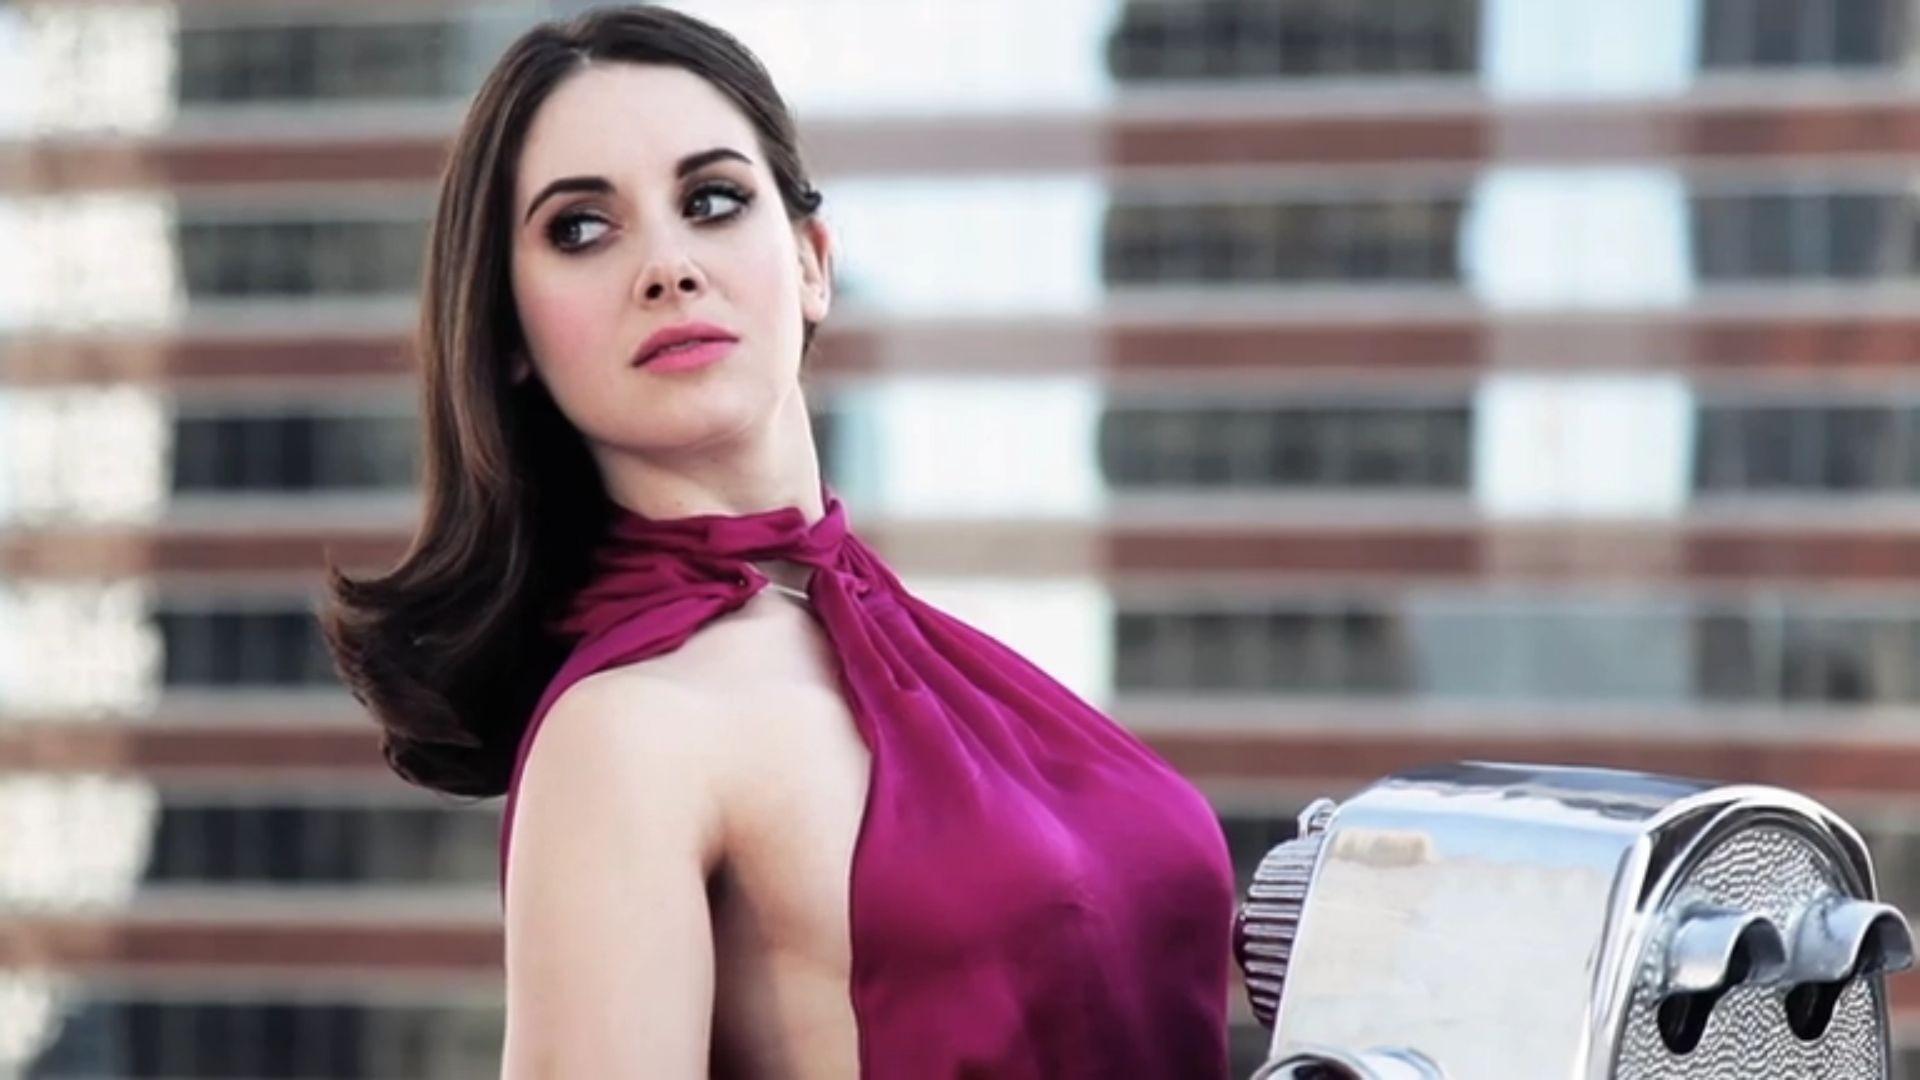 2020 Alison Brie Wallpapers